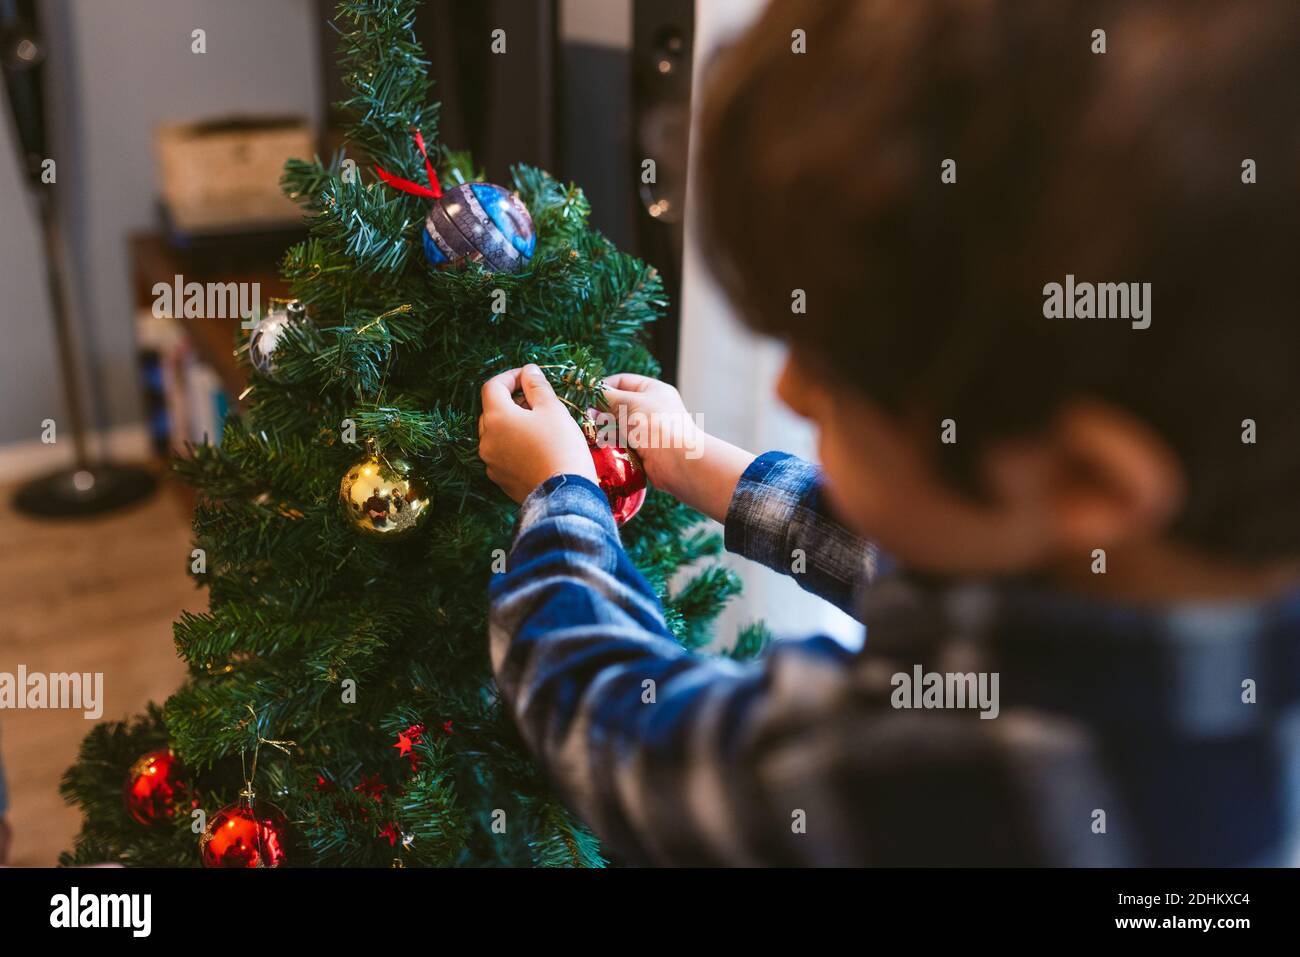 family christmas time at home. cute little child boy decorating christmas tree indoors during holidays season. in winter with warm natural soft light Stock Photo